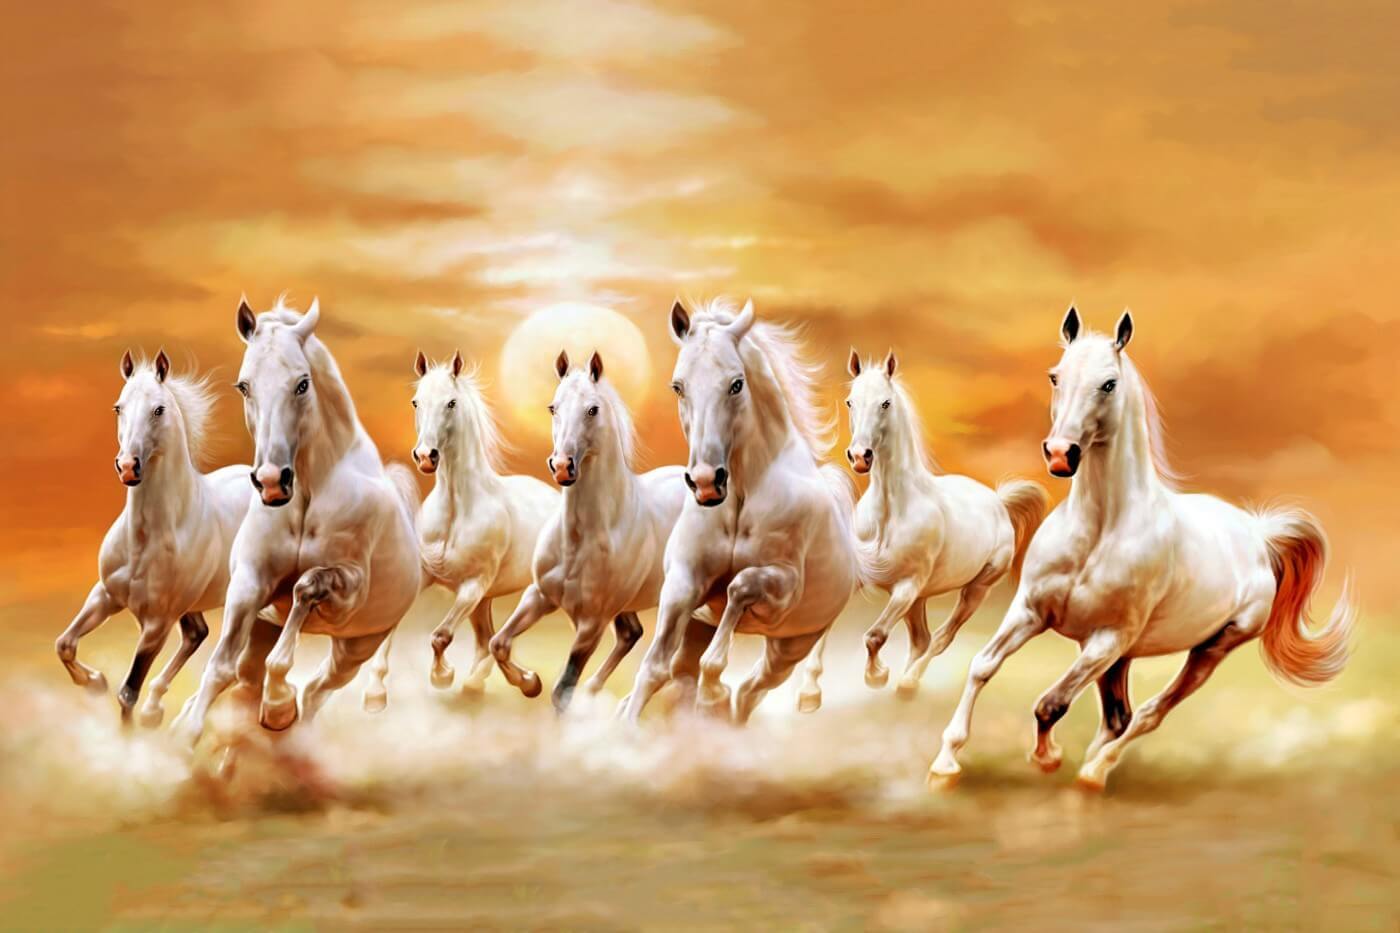 Seven Magnificent White Horses Running - Posters by Joan | Buy ...